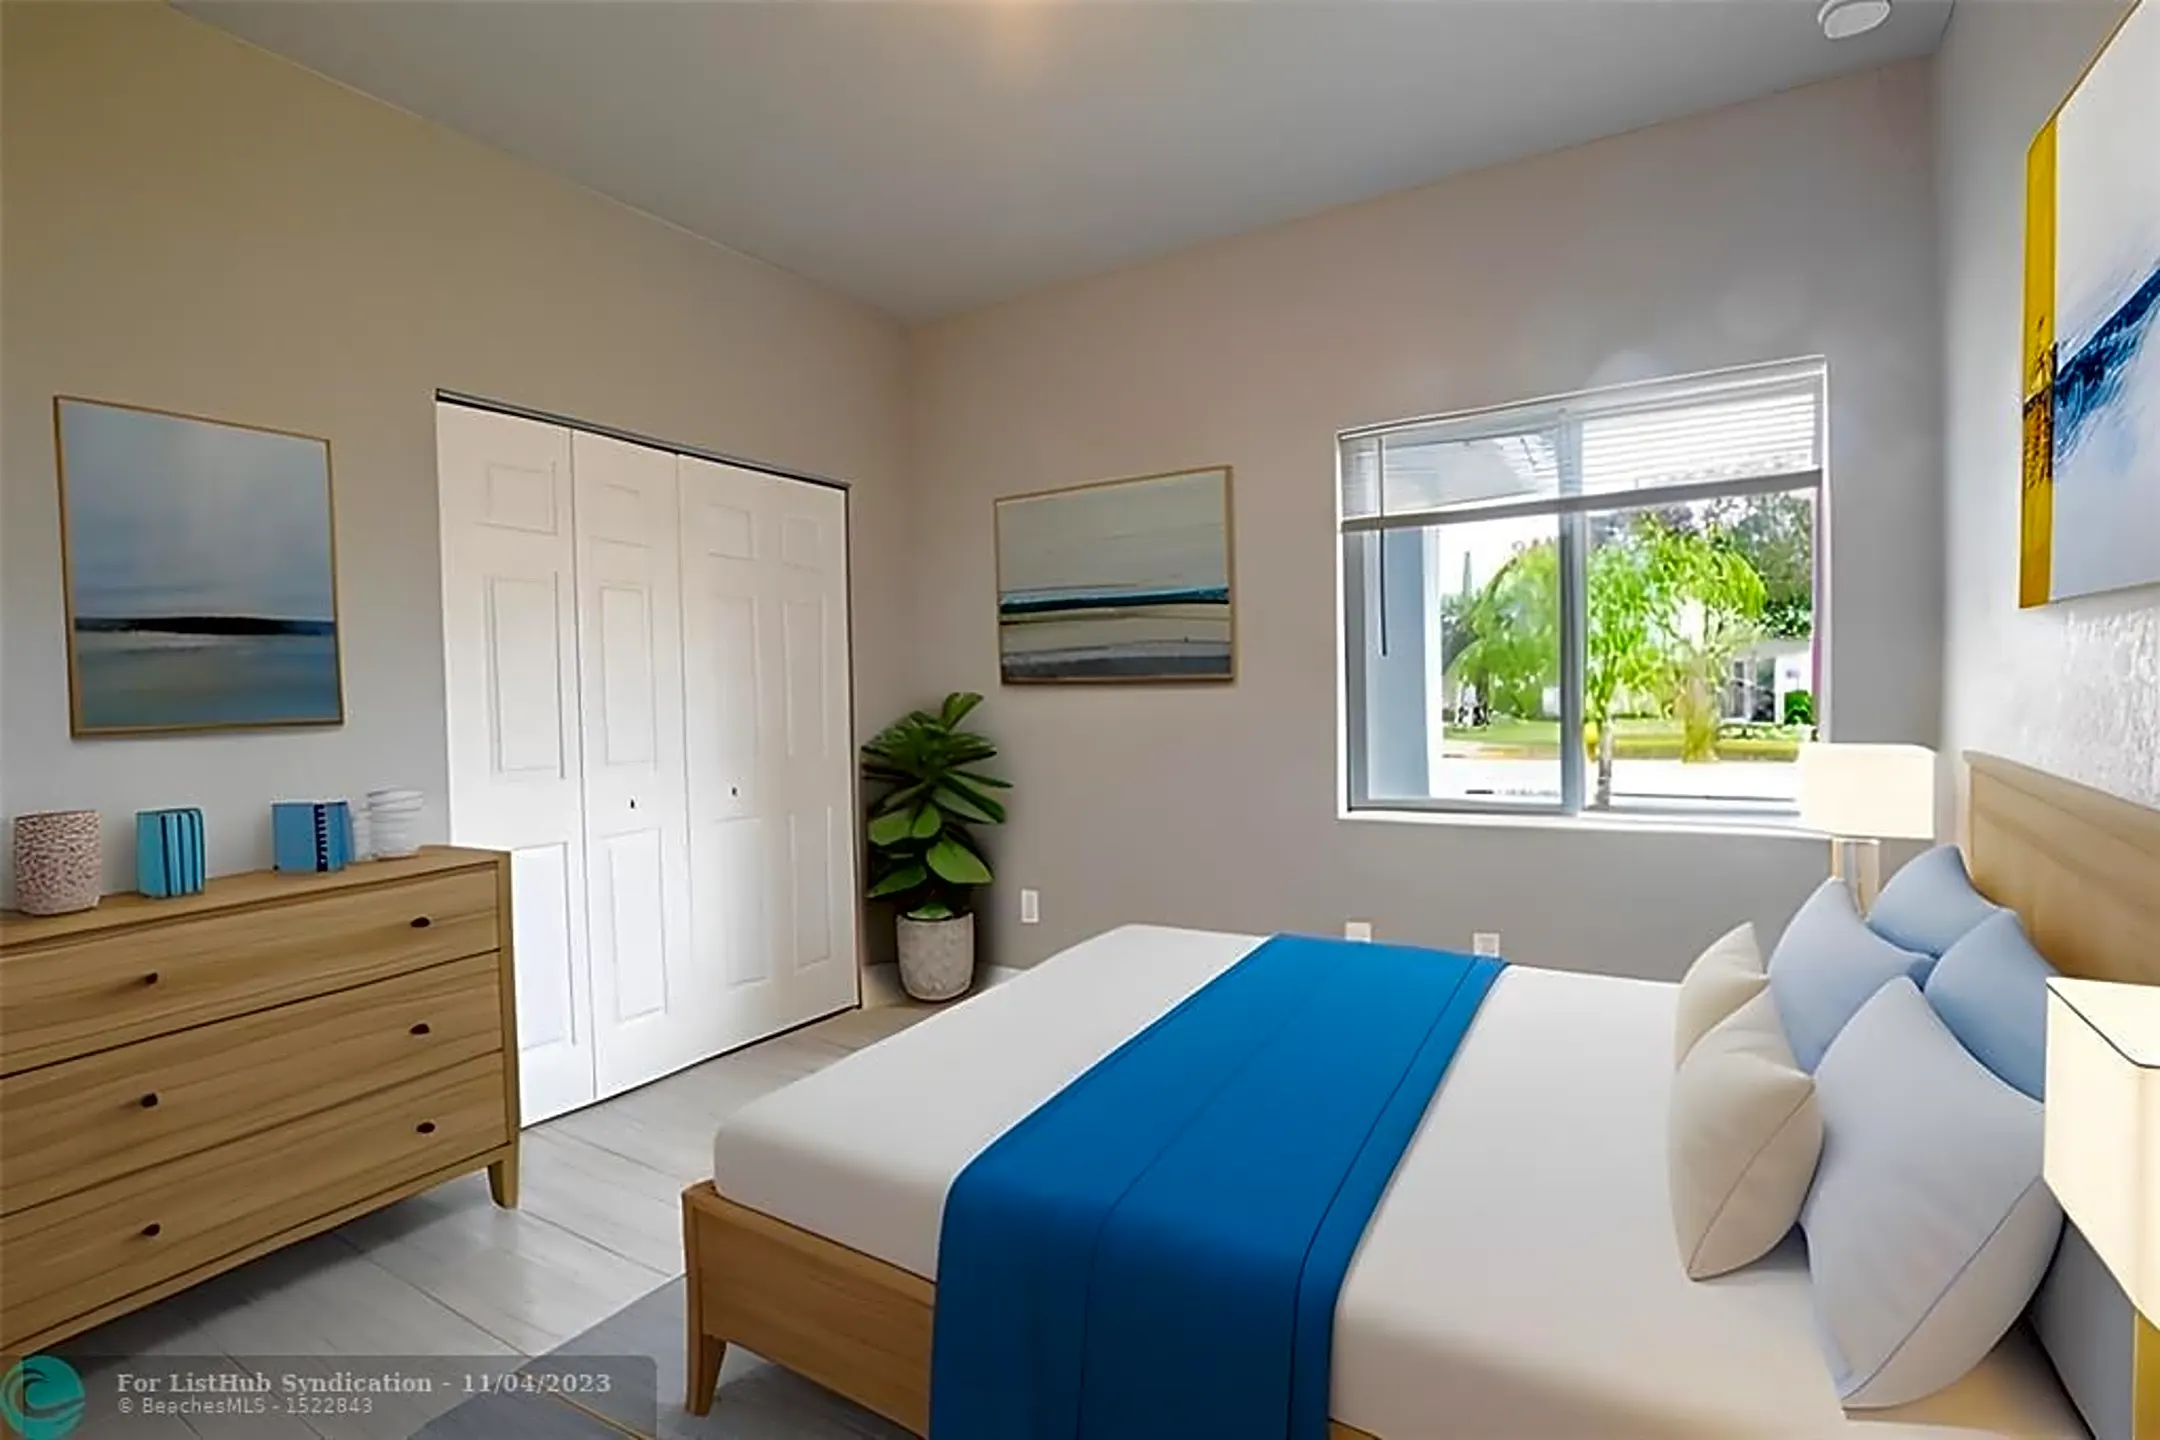 Bedroom - 2019 NW 64th Ave - Sunrise, FL